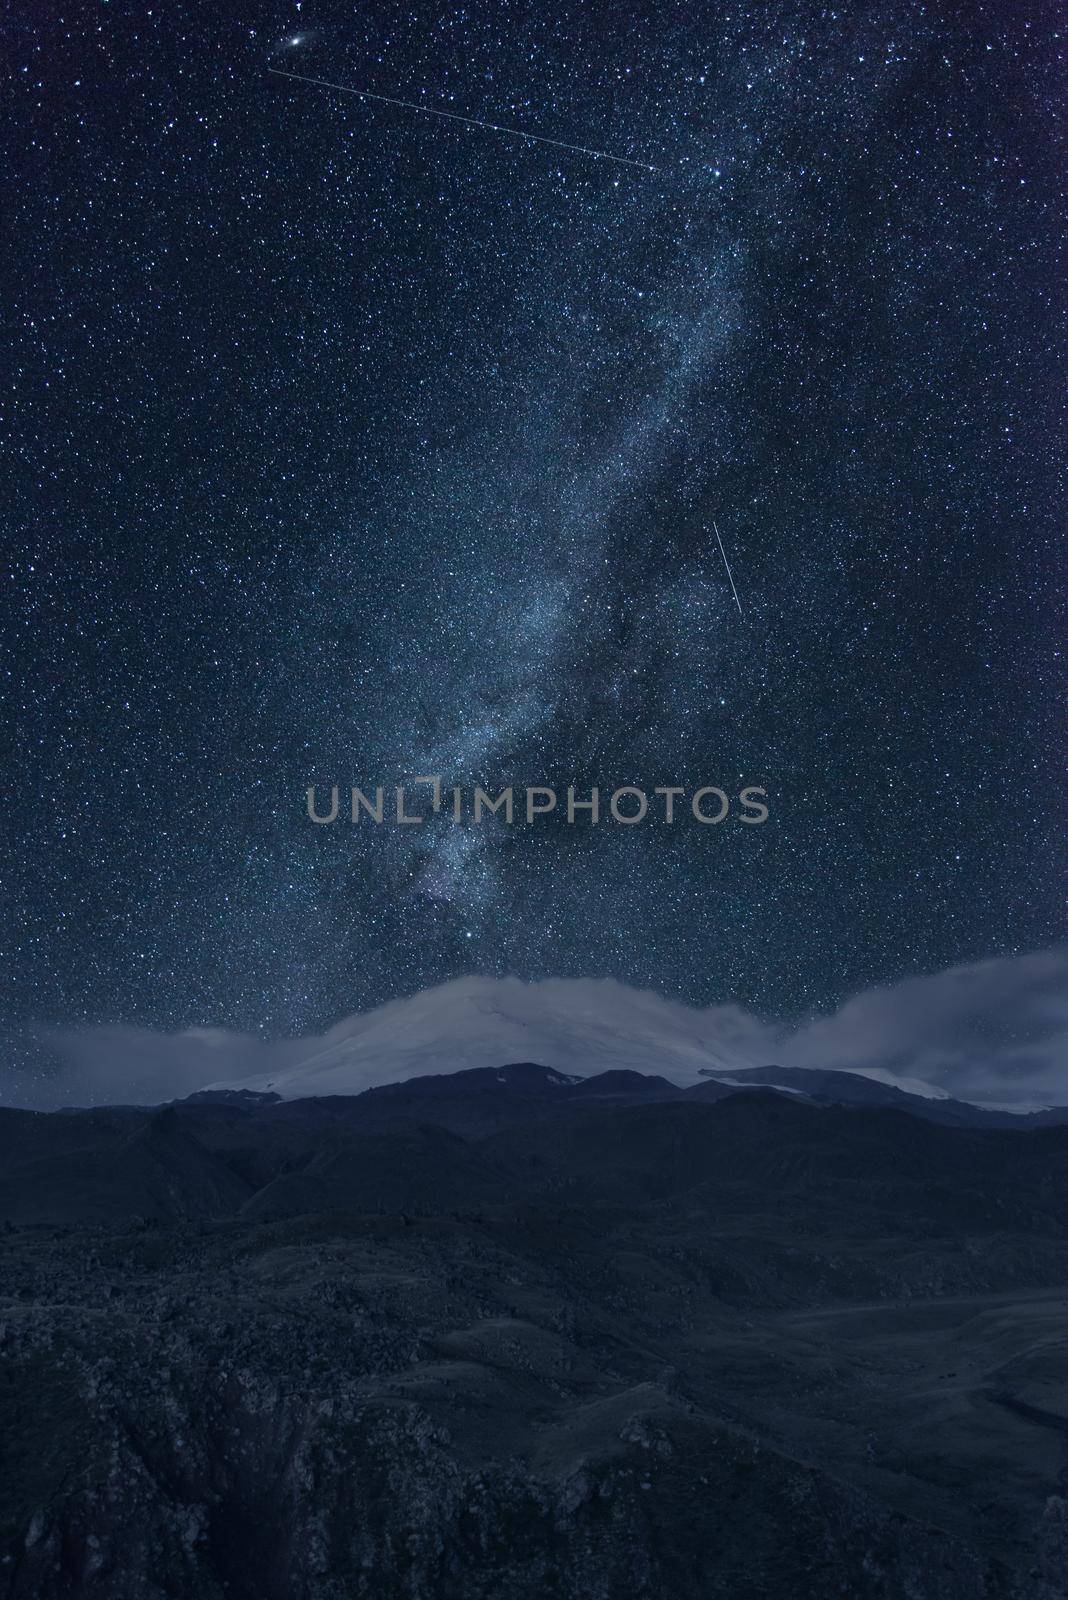 Night sky with stars and milky way over snowy mountains.